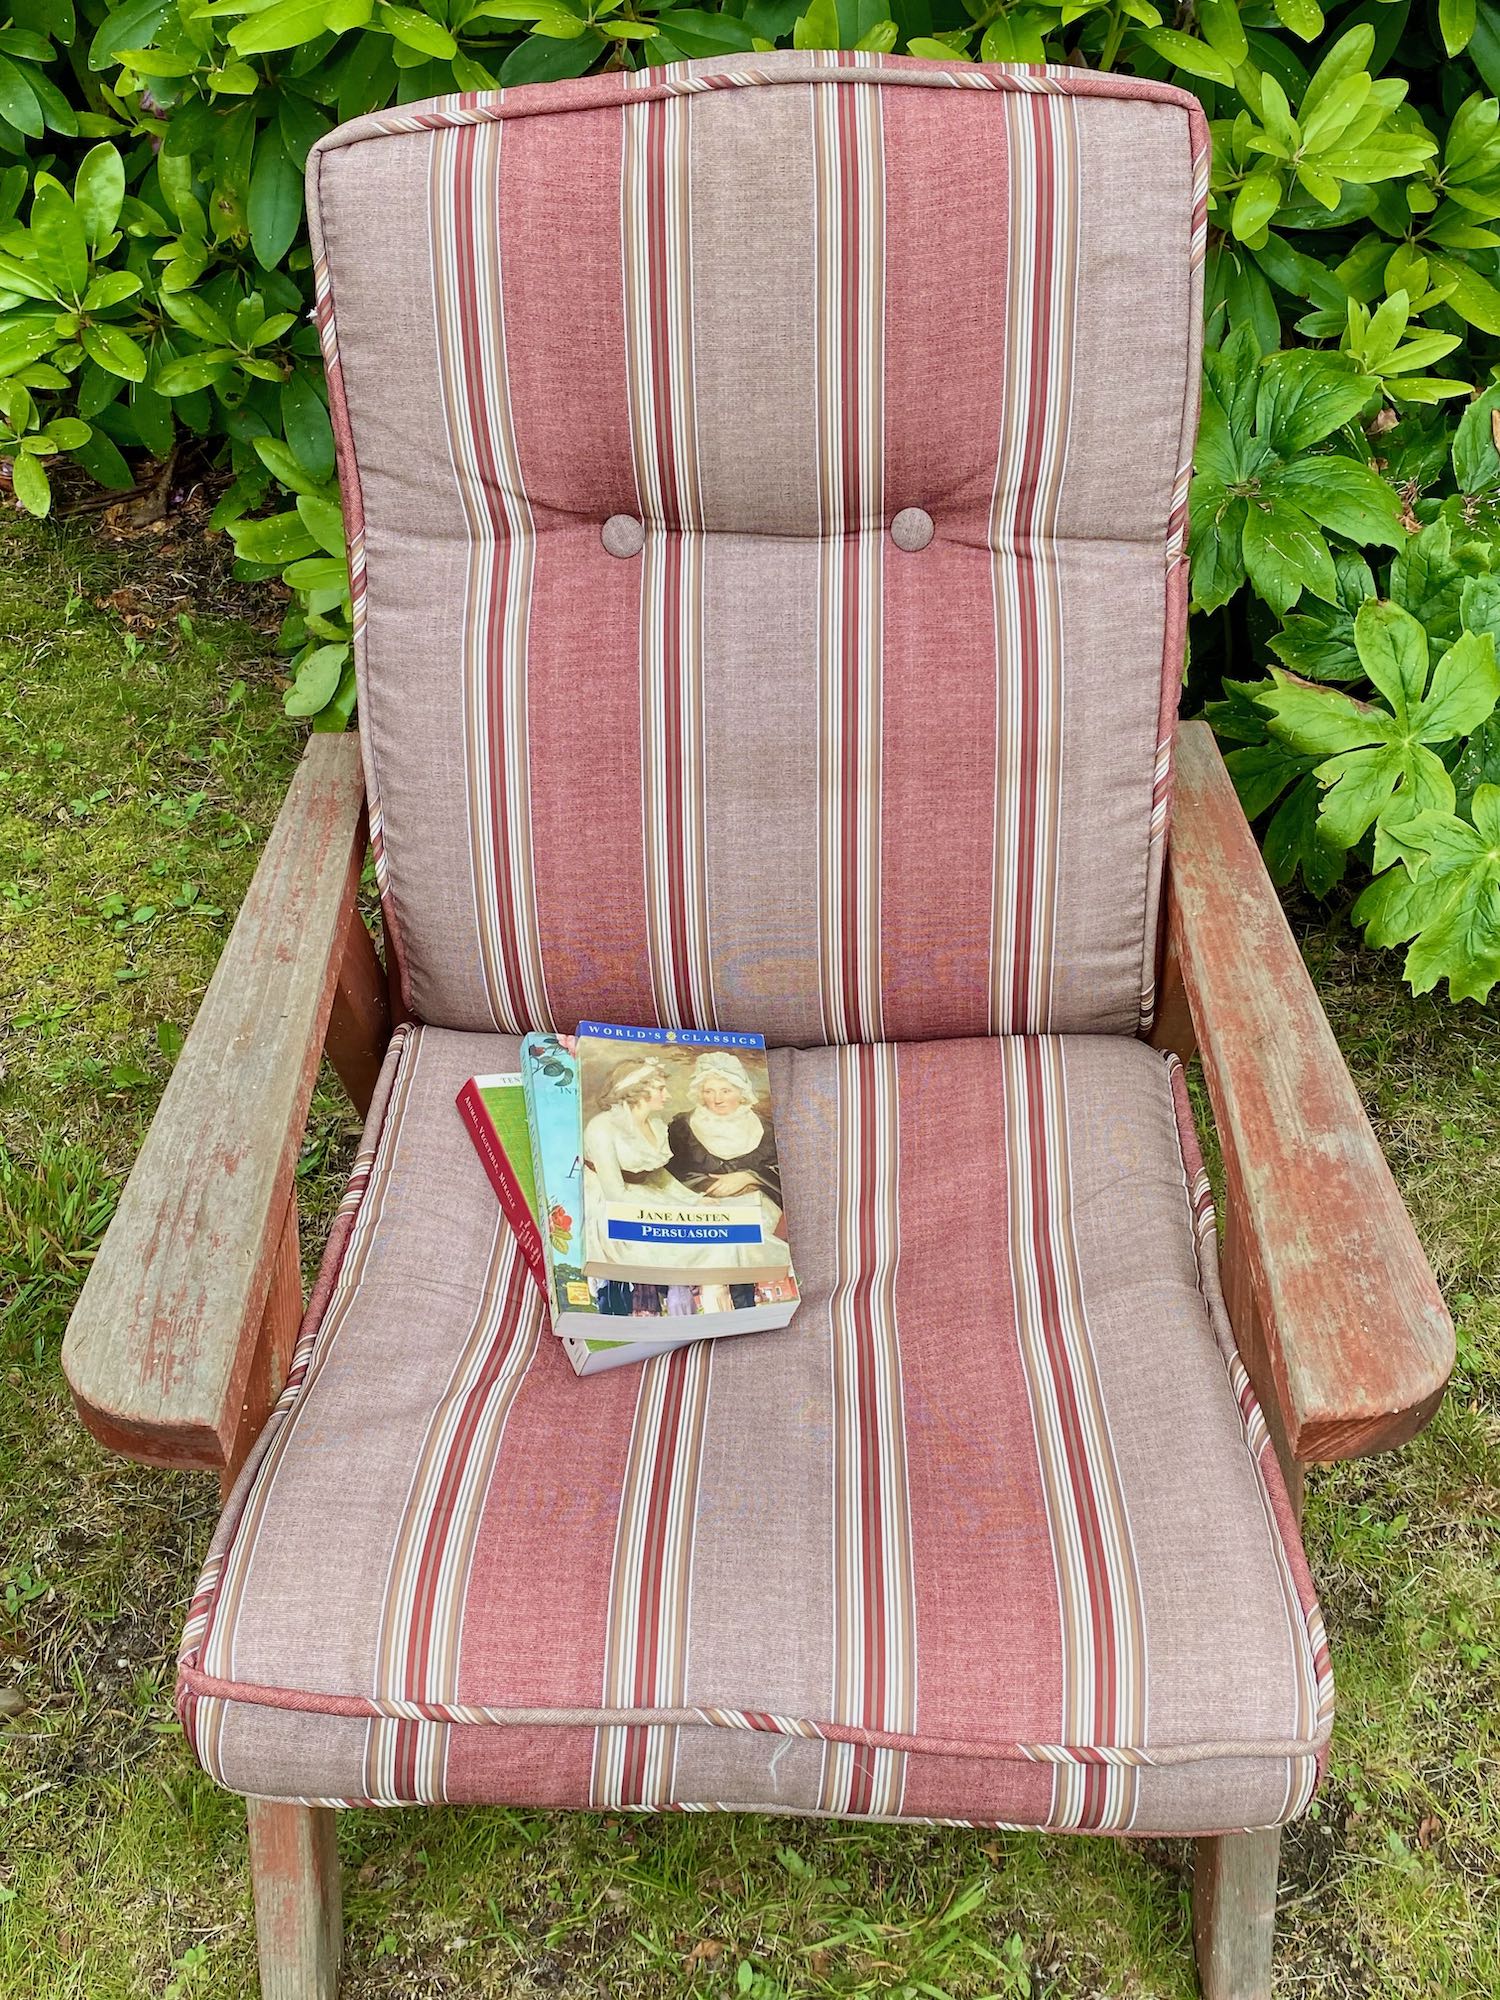 Lawn Chair and Books for Summer Reading